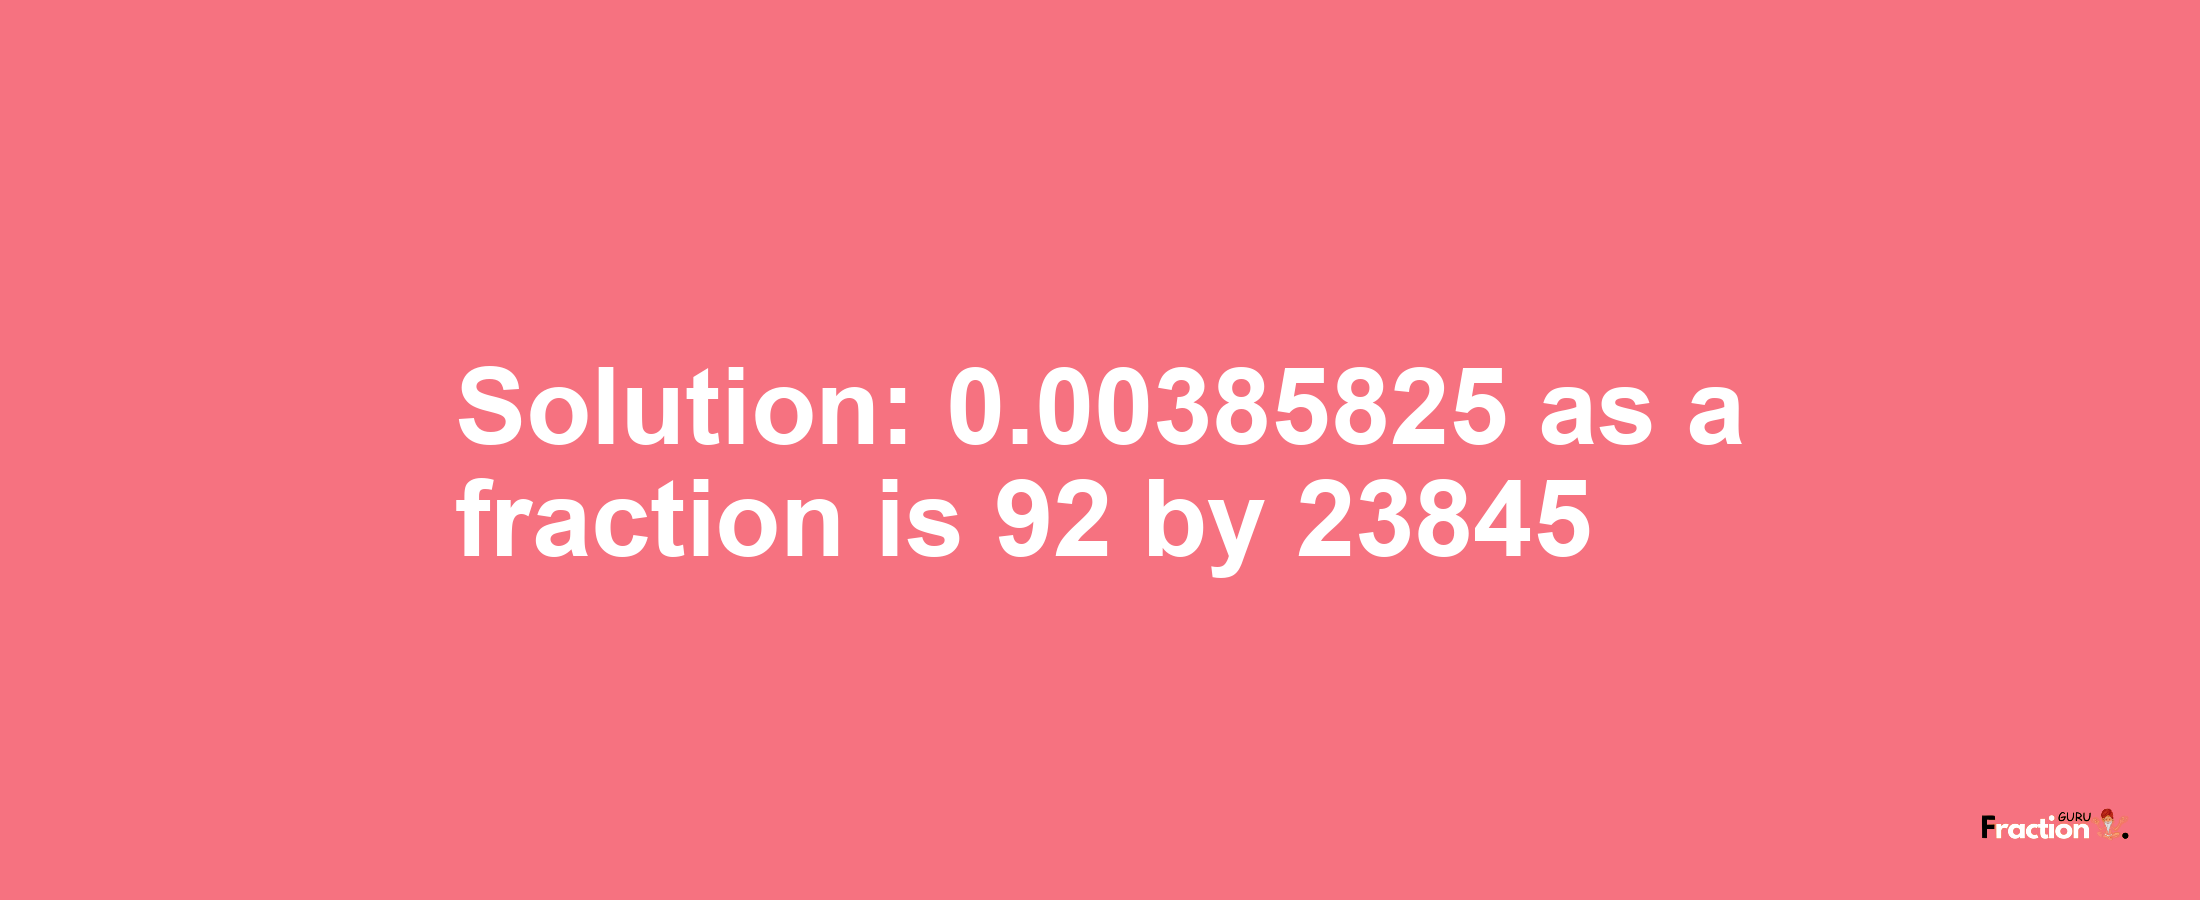 Solution:0.00385825 as a fraction is 92/23845